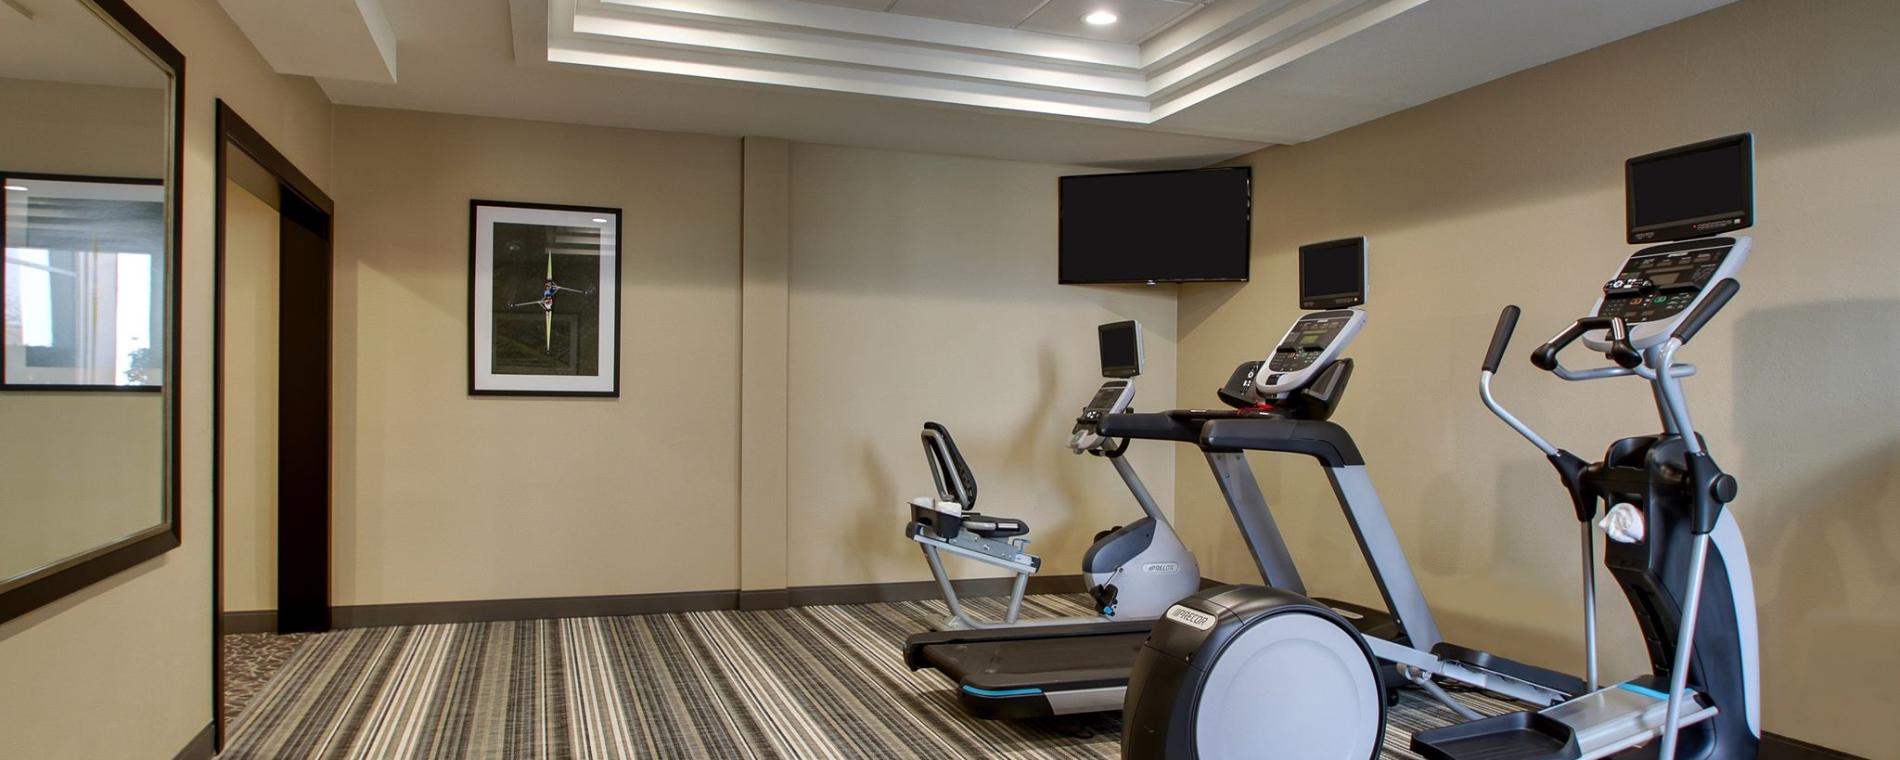 Candlewood Suites Wichita East Fitness Center/Yoga room